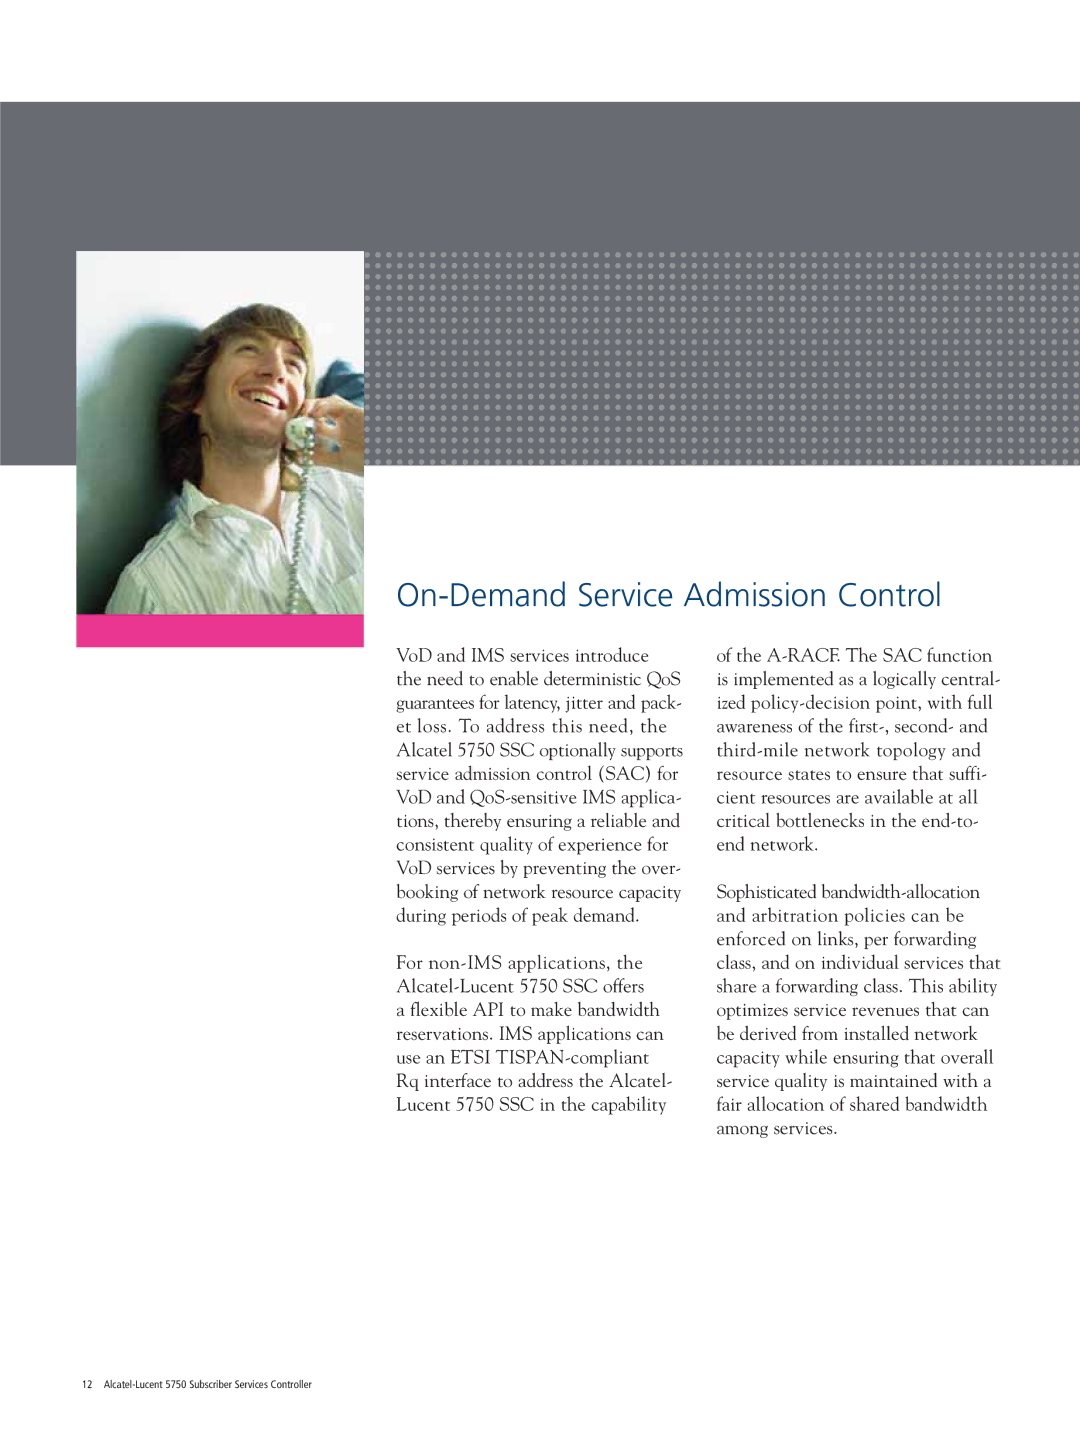 Alcatel-Lucent 5750 SSC manual On-Demand Service Admission Control 